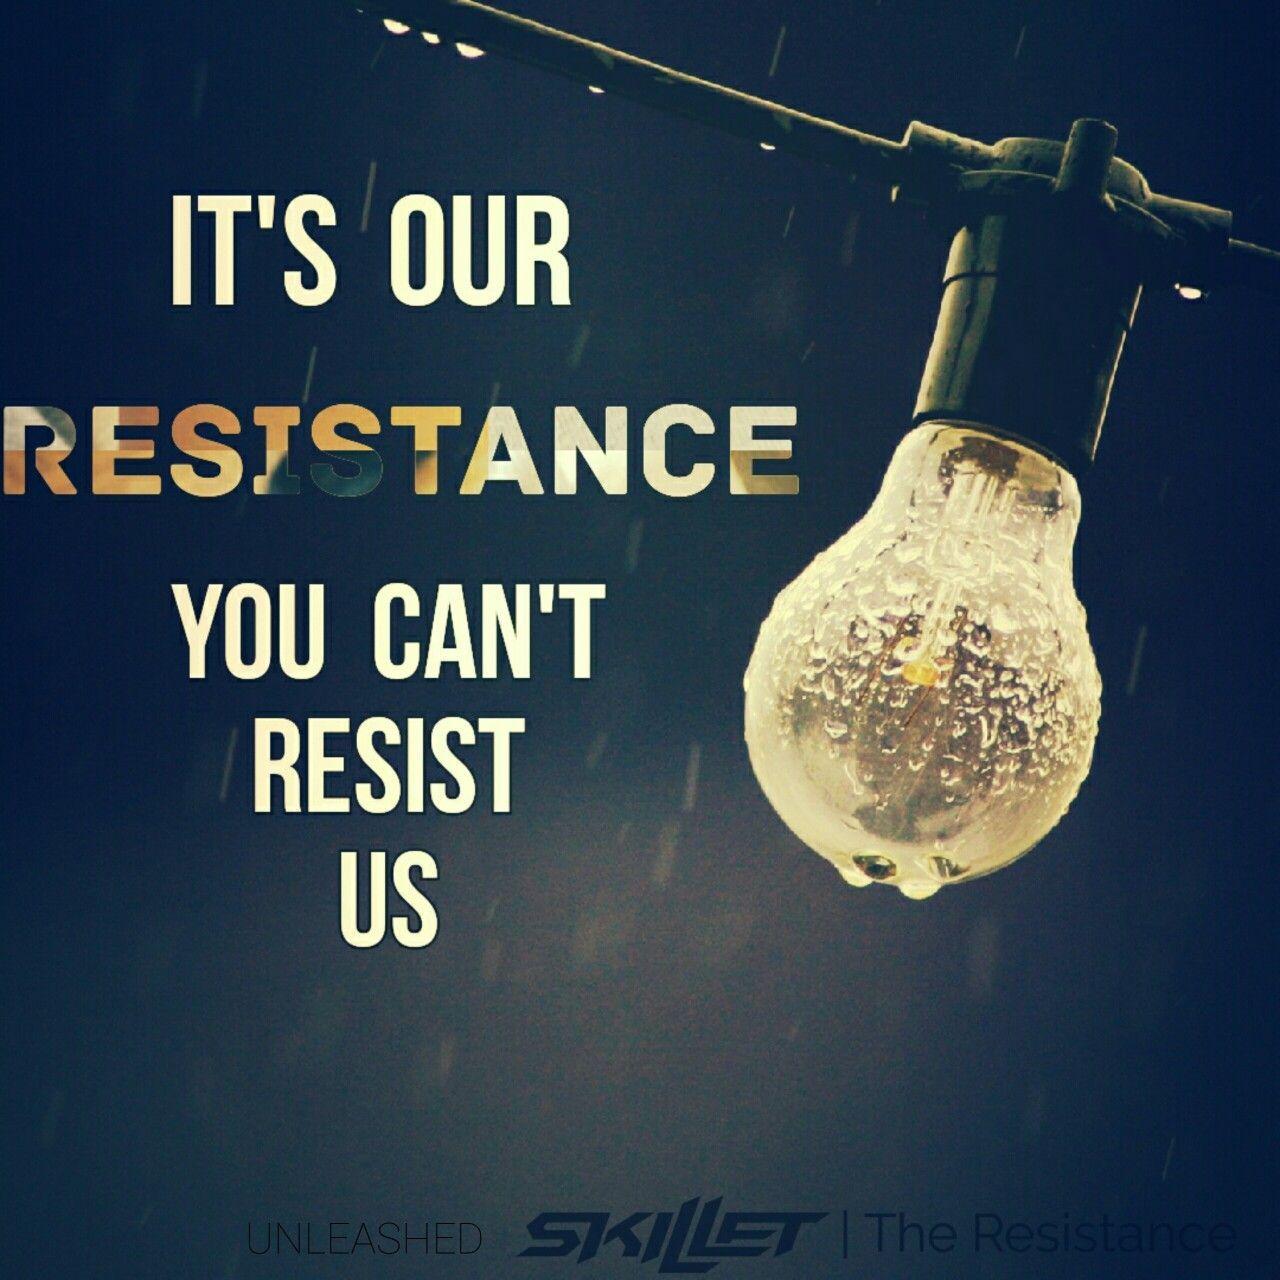 Skillet UNLEASHED The Resistance Wallpaper 2016. Christian Song